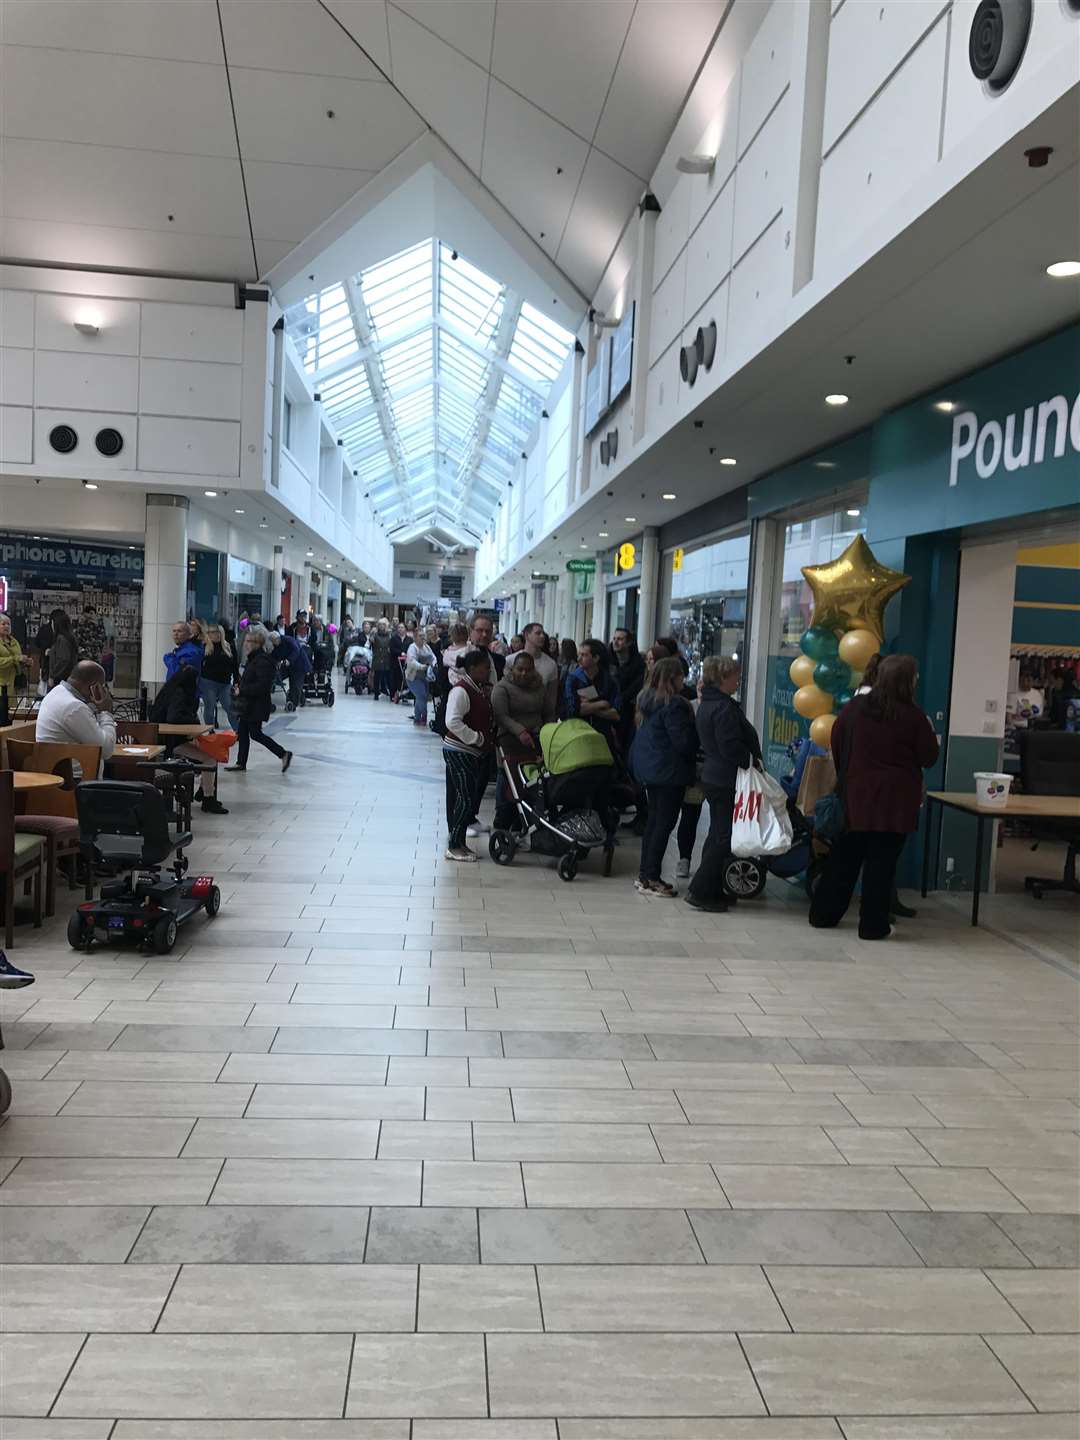 People queued for up to an hour to see the new shop and TOWIE star (1652376)